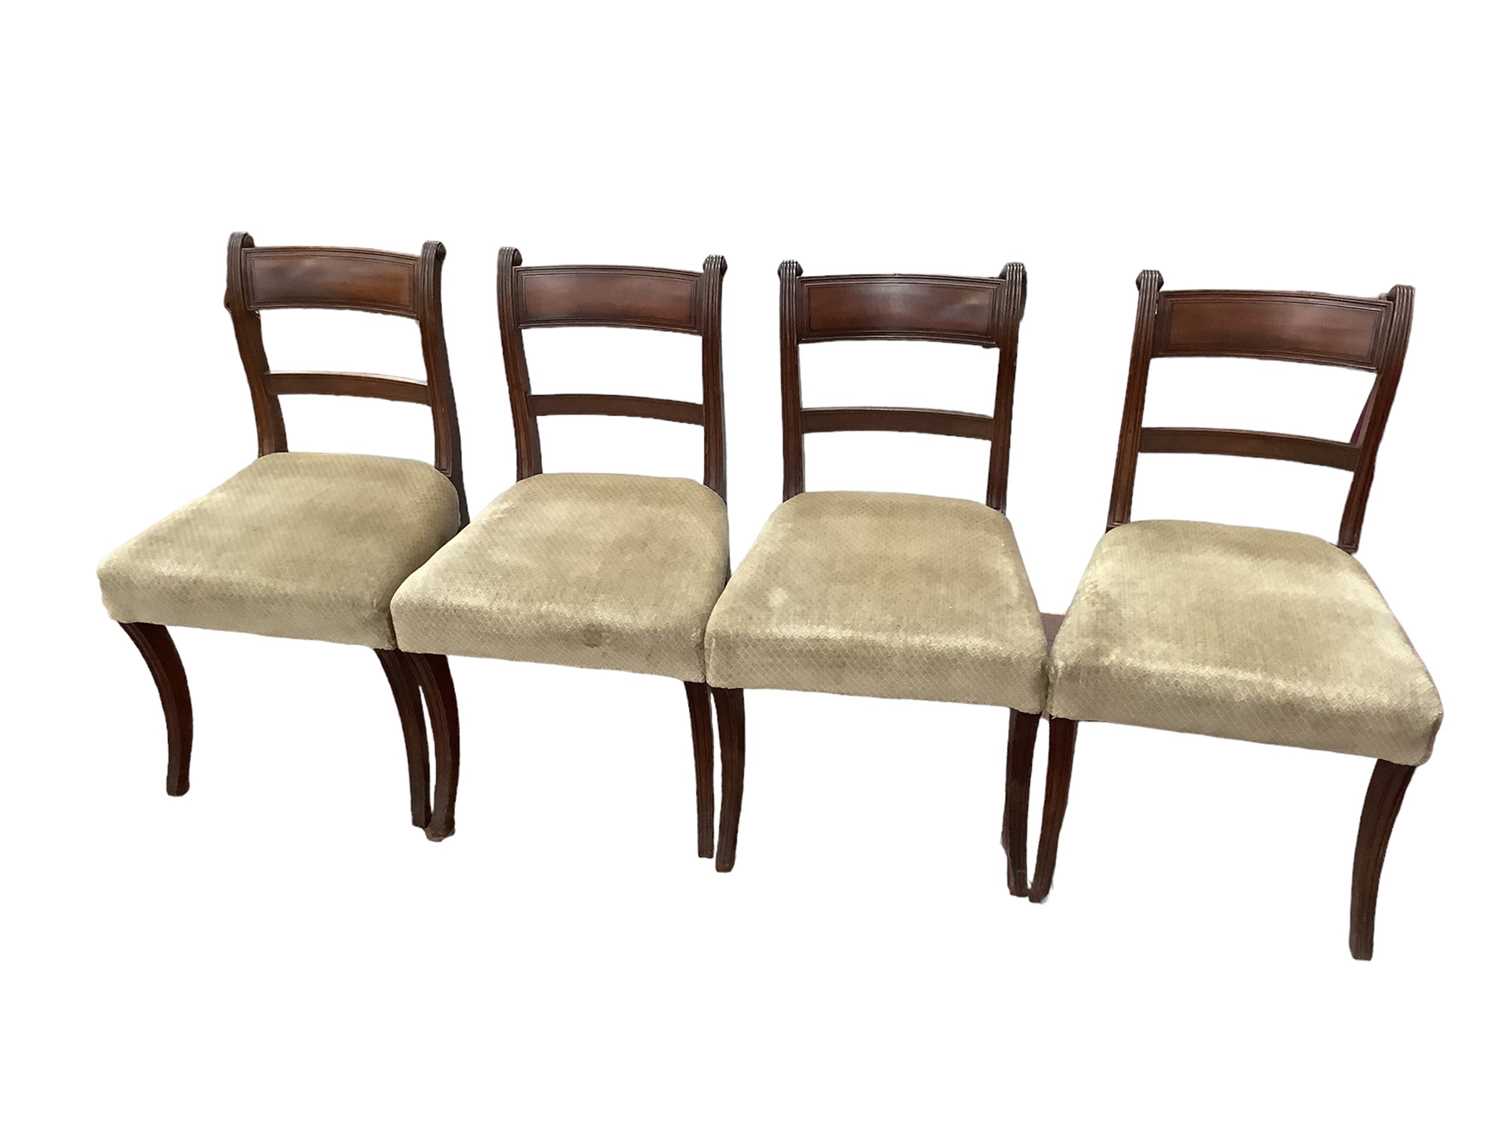 Set of four Regency mahogany dining chairs, each with tablet back and stuffover seats, on sabre legs